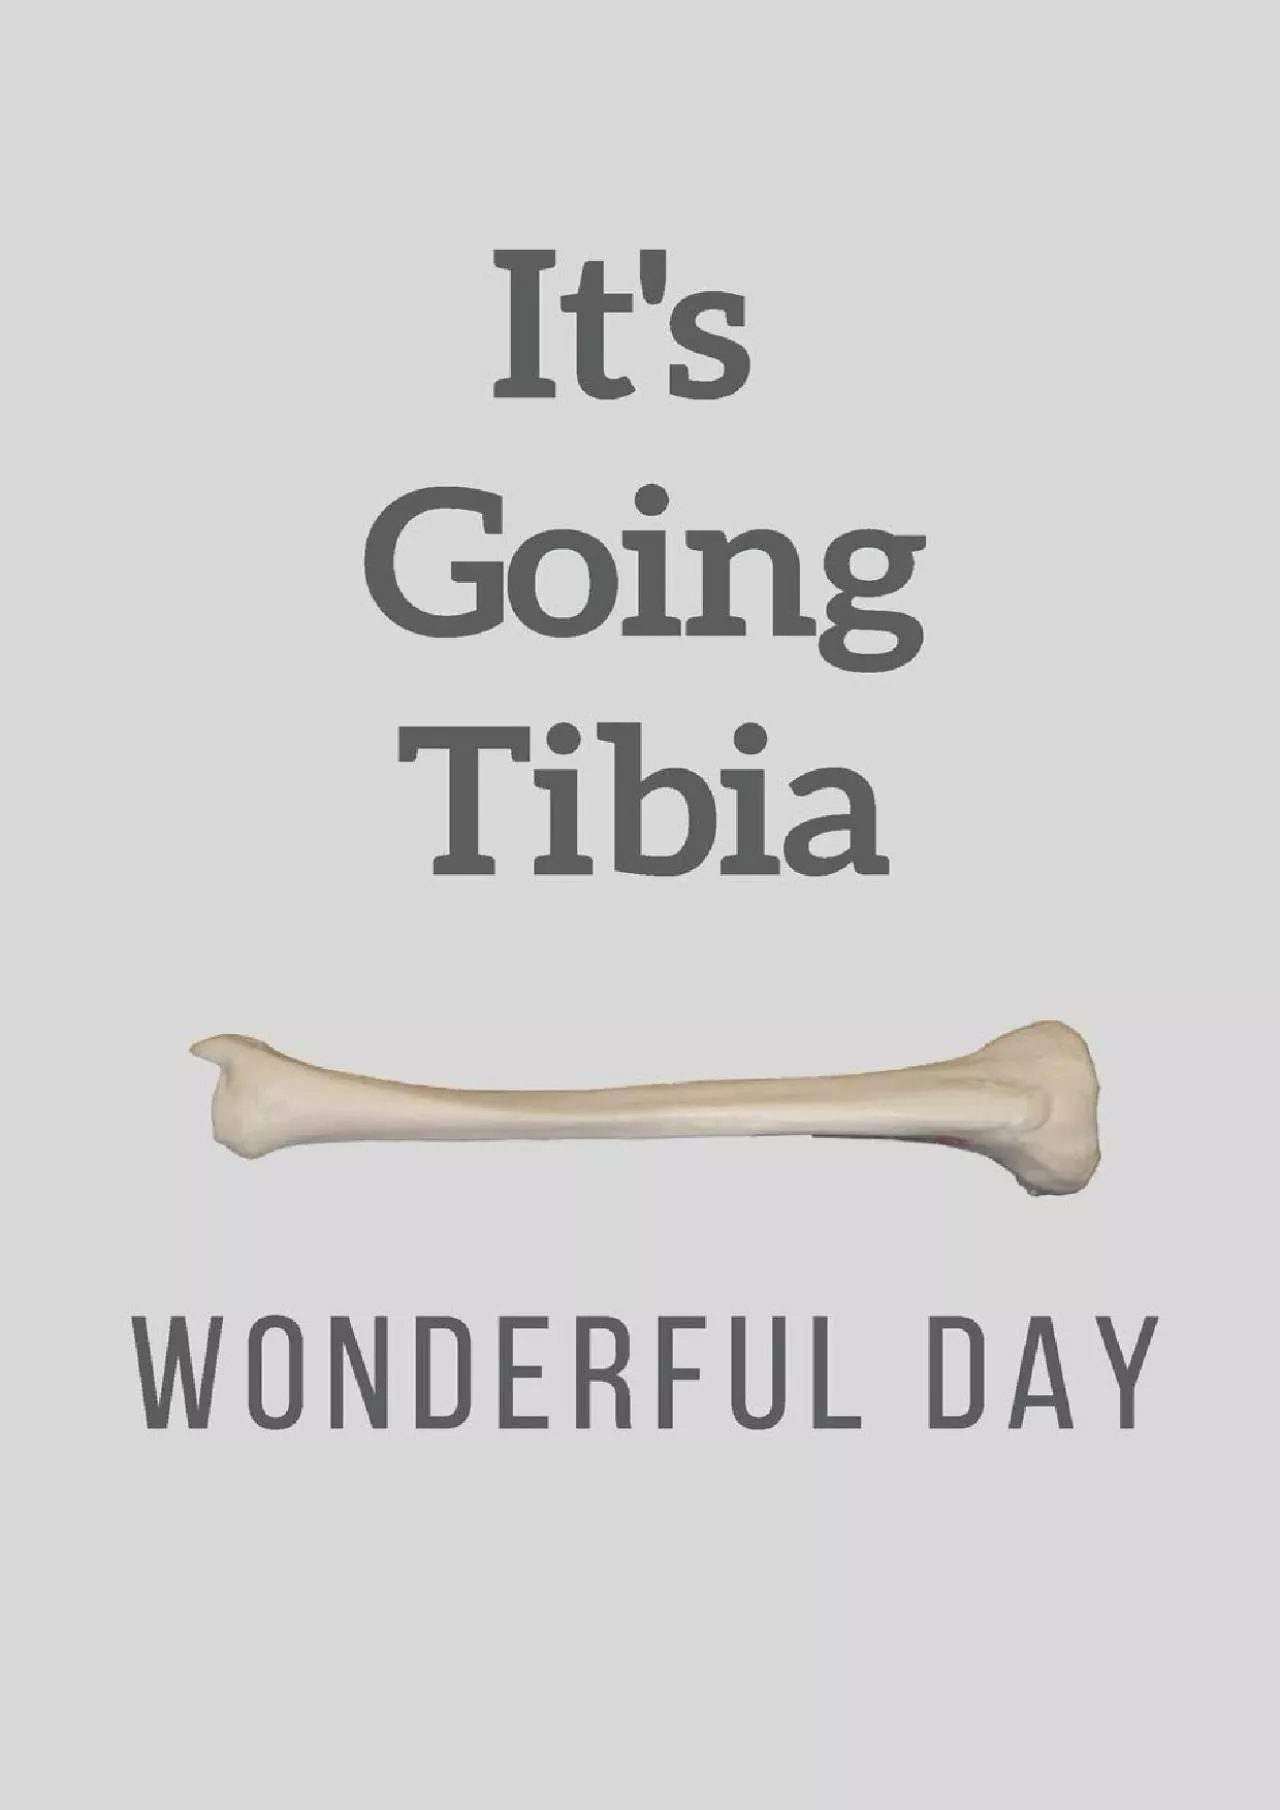 (DOWNLOAD)-It\'s Going Tibia Wonderful Day: Physician, Osteopath, Physio, Medical Assistant,